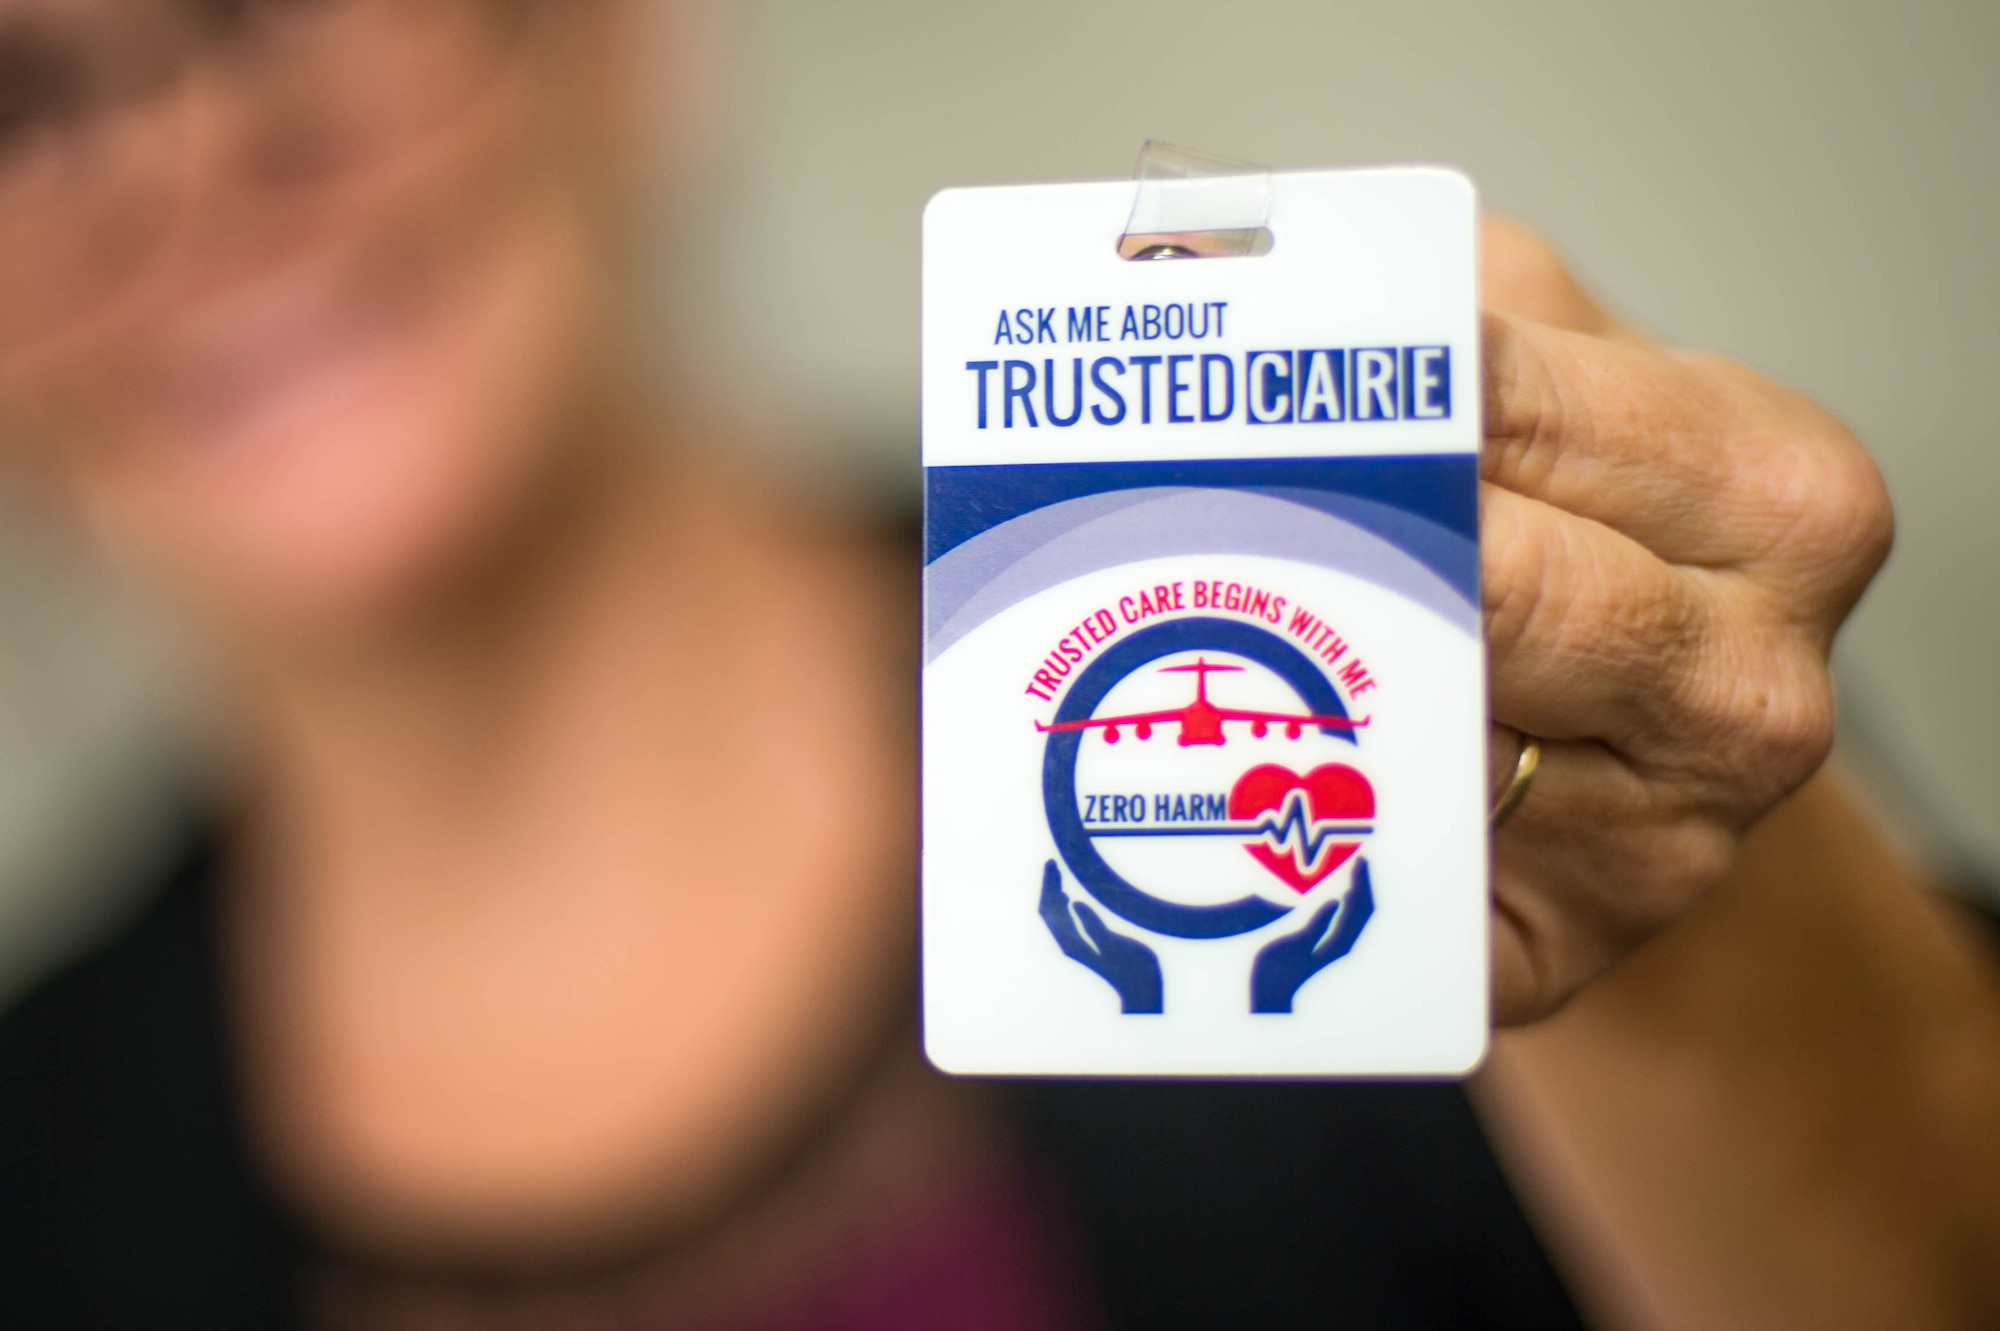 The “Trusted Care” badge serves as a reminder for the entire U.S. Air Force Medical Service (AFMS) to provide exemplary patient-centered care at every level. In order to ensure the patient is placed at the center of their care, Trusted Care has teamed up with the Institute of Healthcare Improvement (IHI) to develop an effective training program. Training is aimed at fostering a culture of safety from front-line providers to senior leaders. (U.S. Air Force photo by SSgt Jensen Stidham)